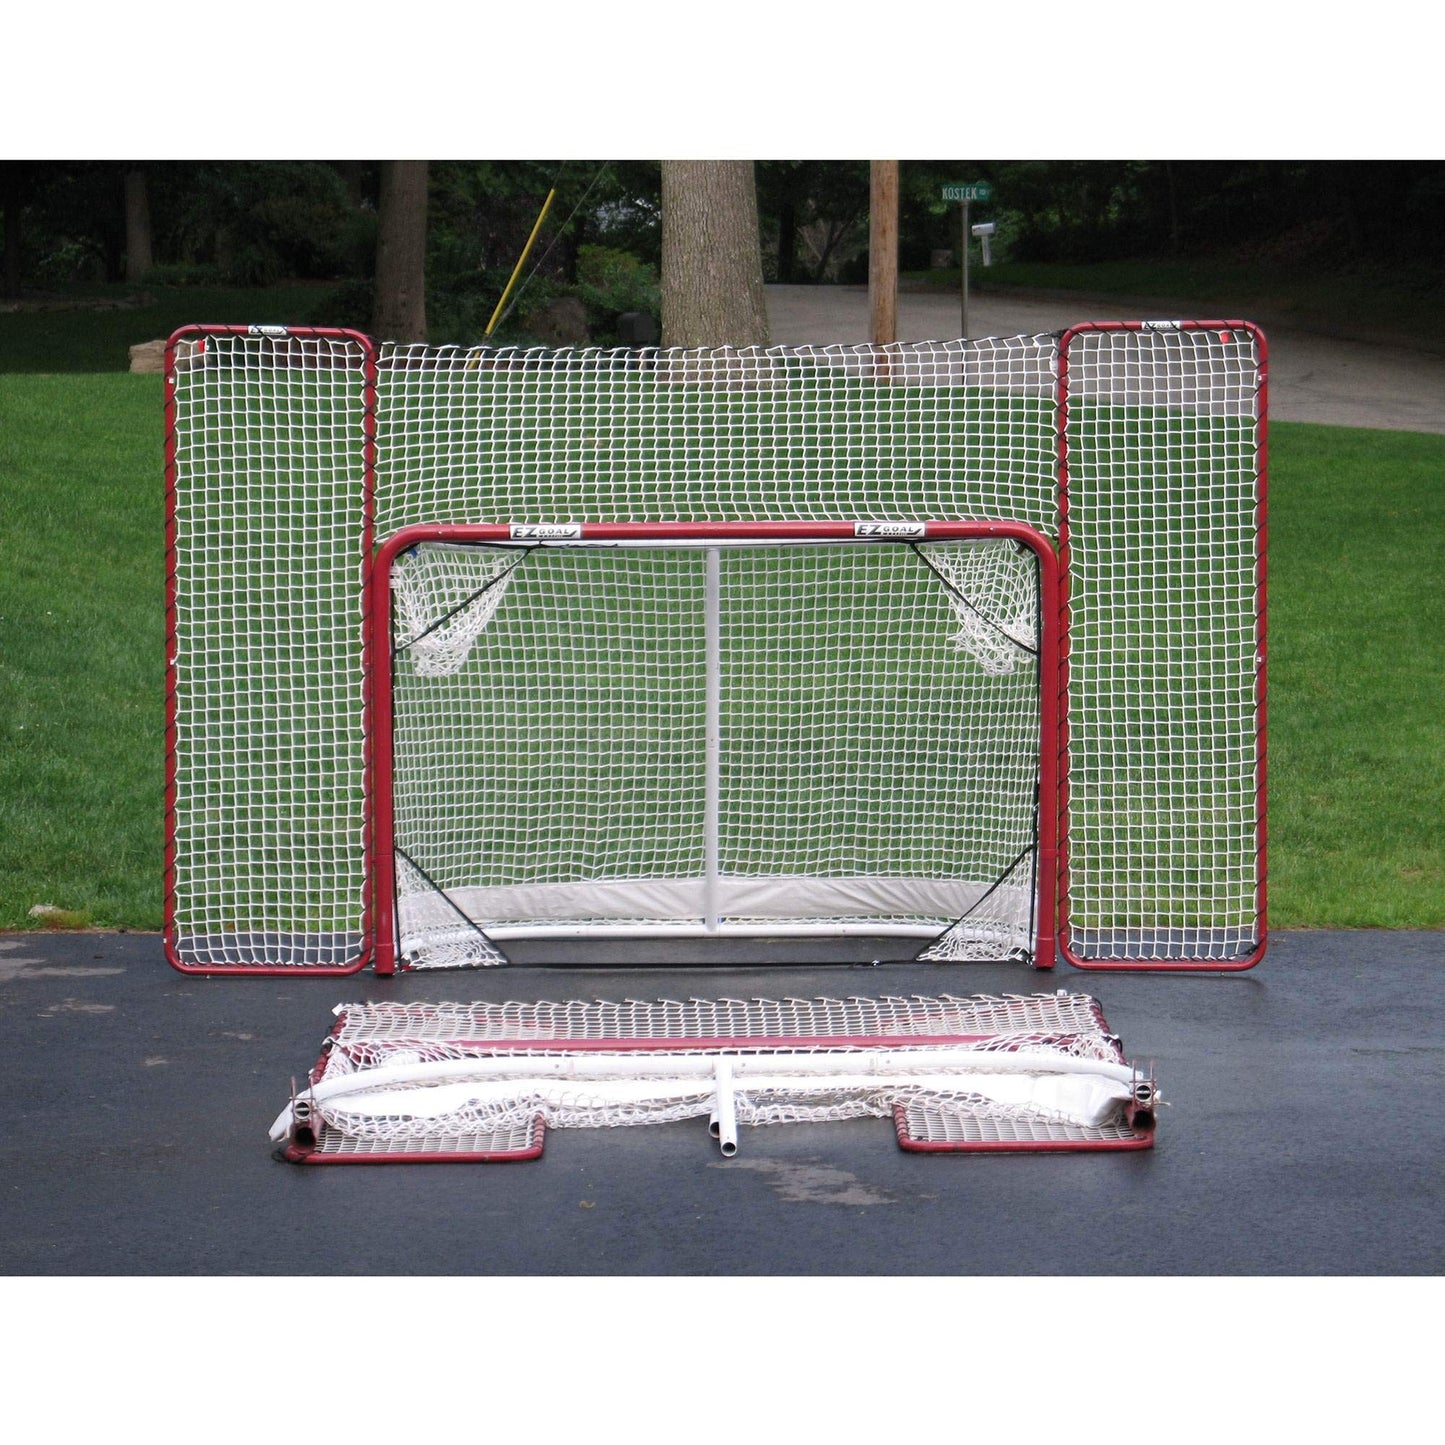 EZGoal Hockey Folding Pro Goal with Backstop and Targets, 2-Inch, Red/White